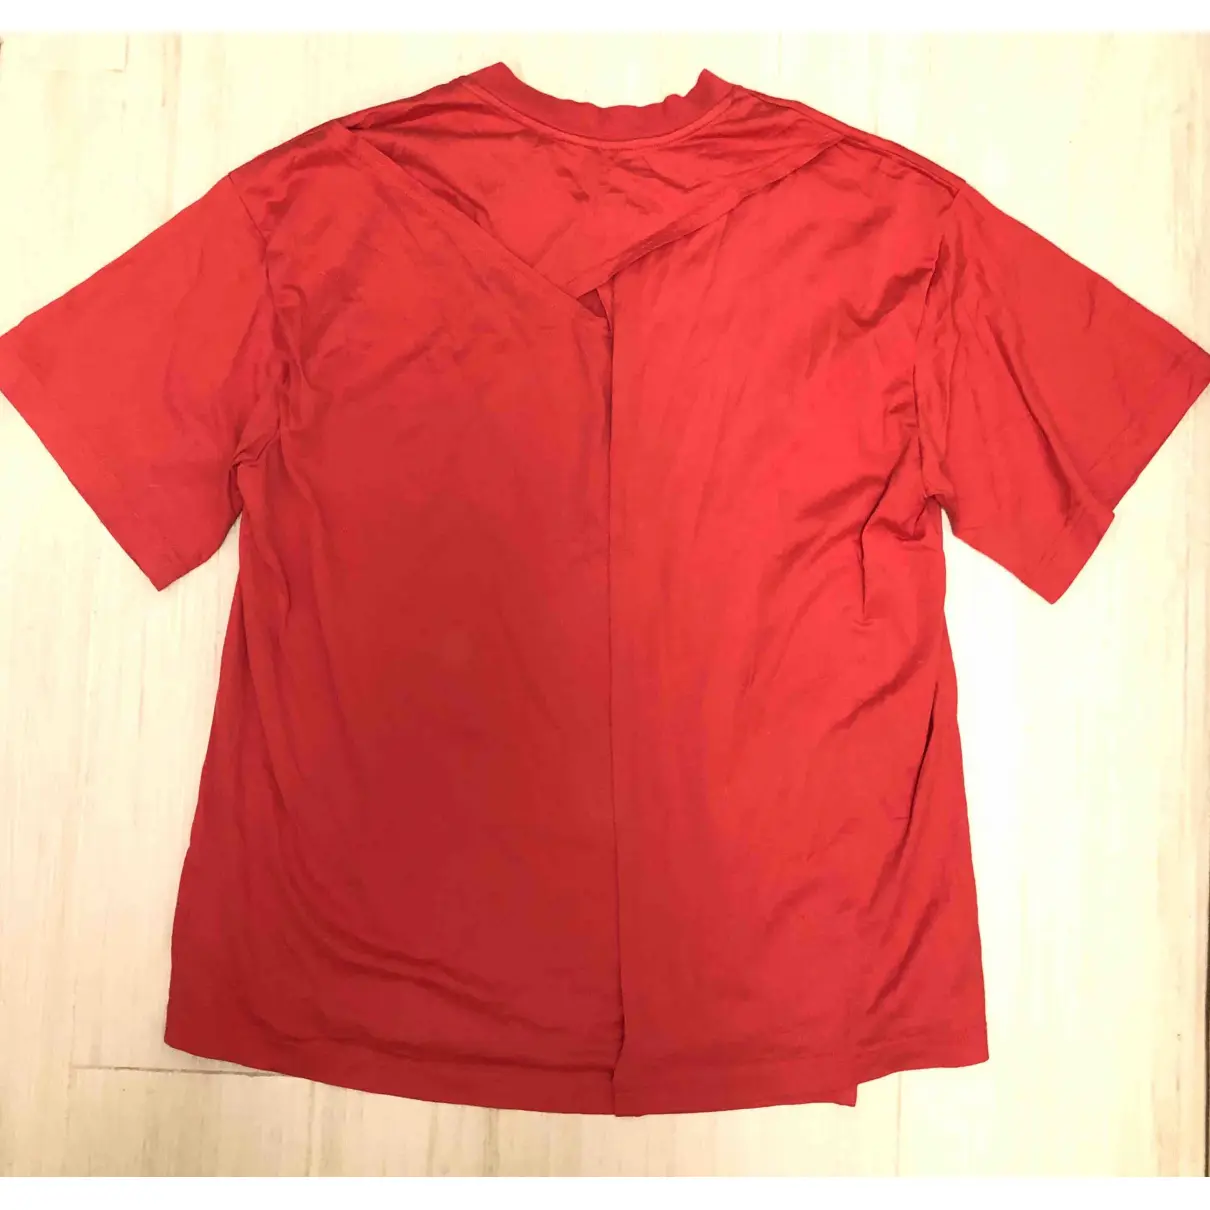 Buy Y/Project Red Cotton Top online